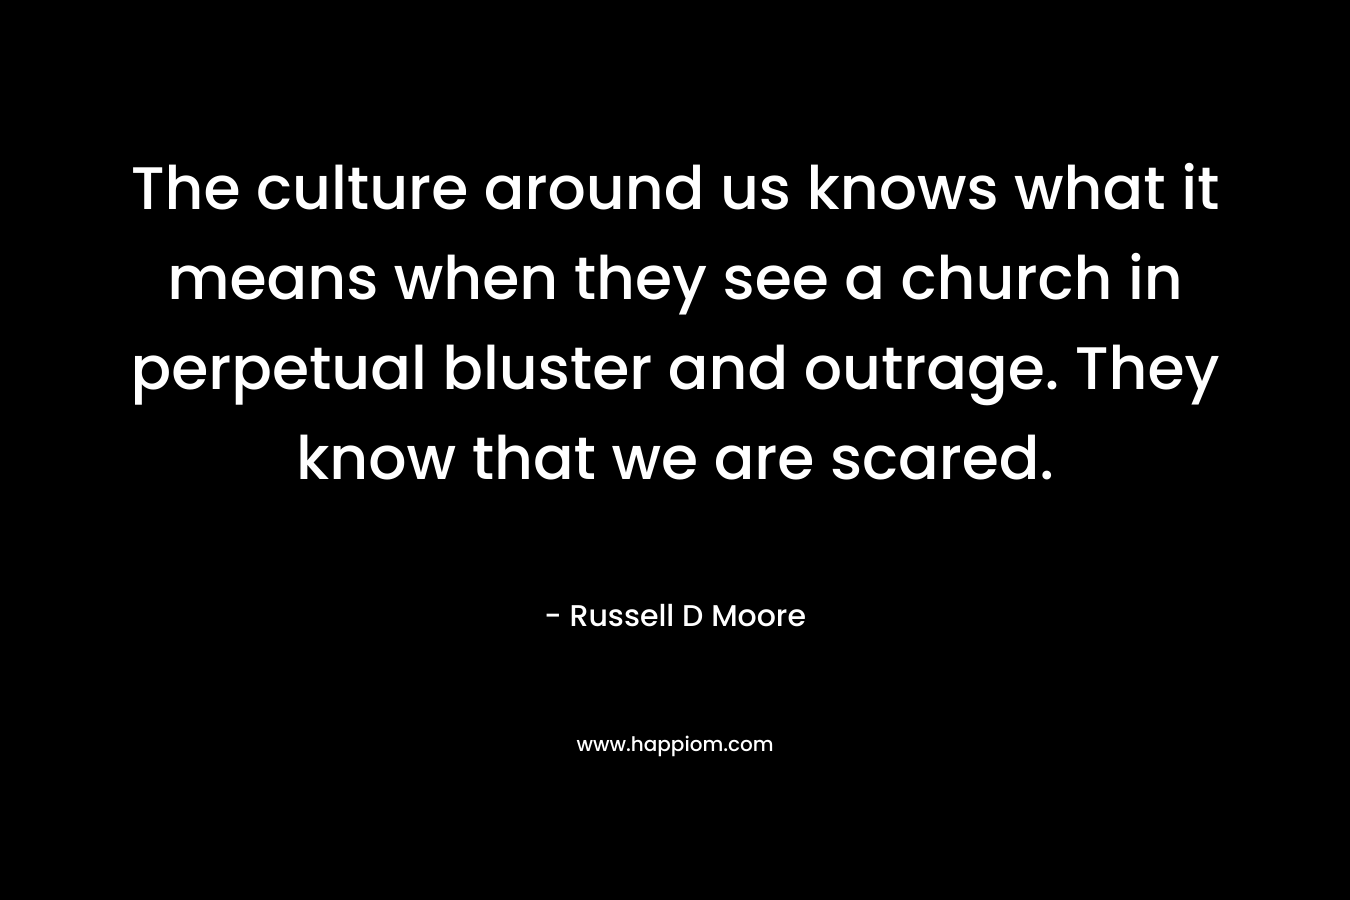 The culture around us knows what it means when they see a church in perpetual bluster and outrage. They know that we are scared.